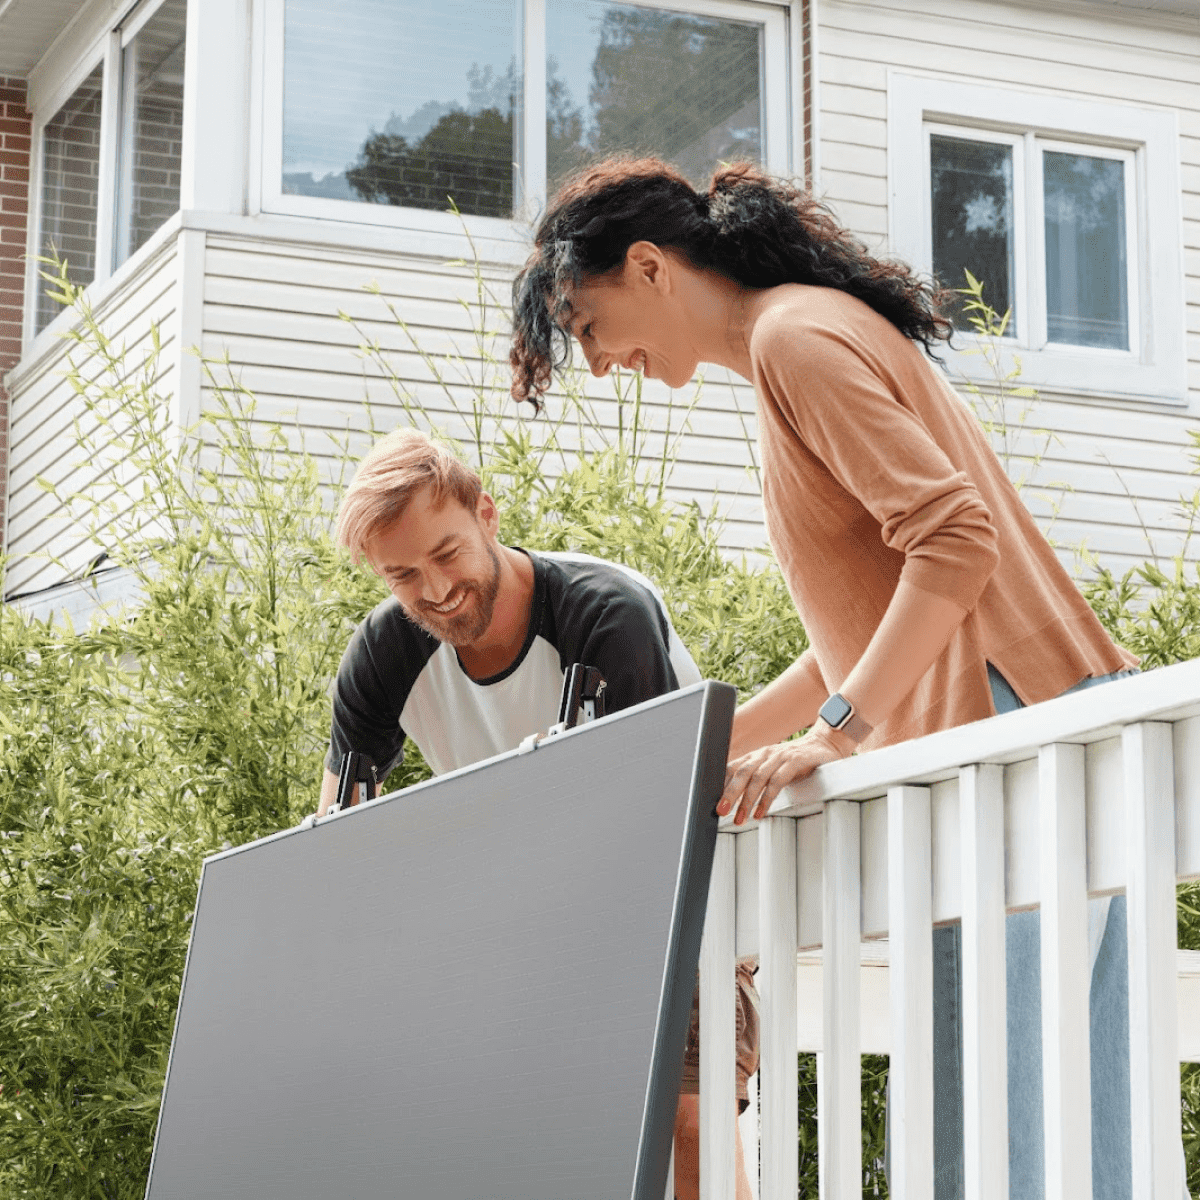 A man and a woman installing a solar panel on their balcony